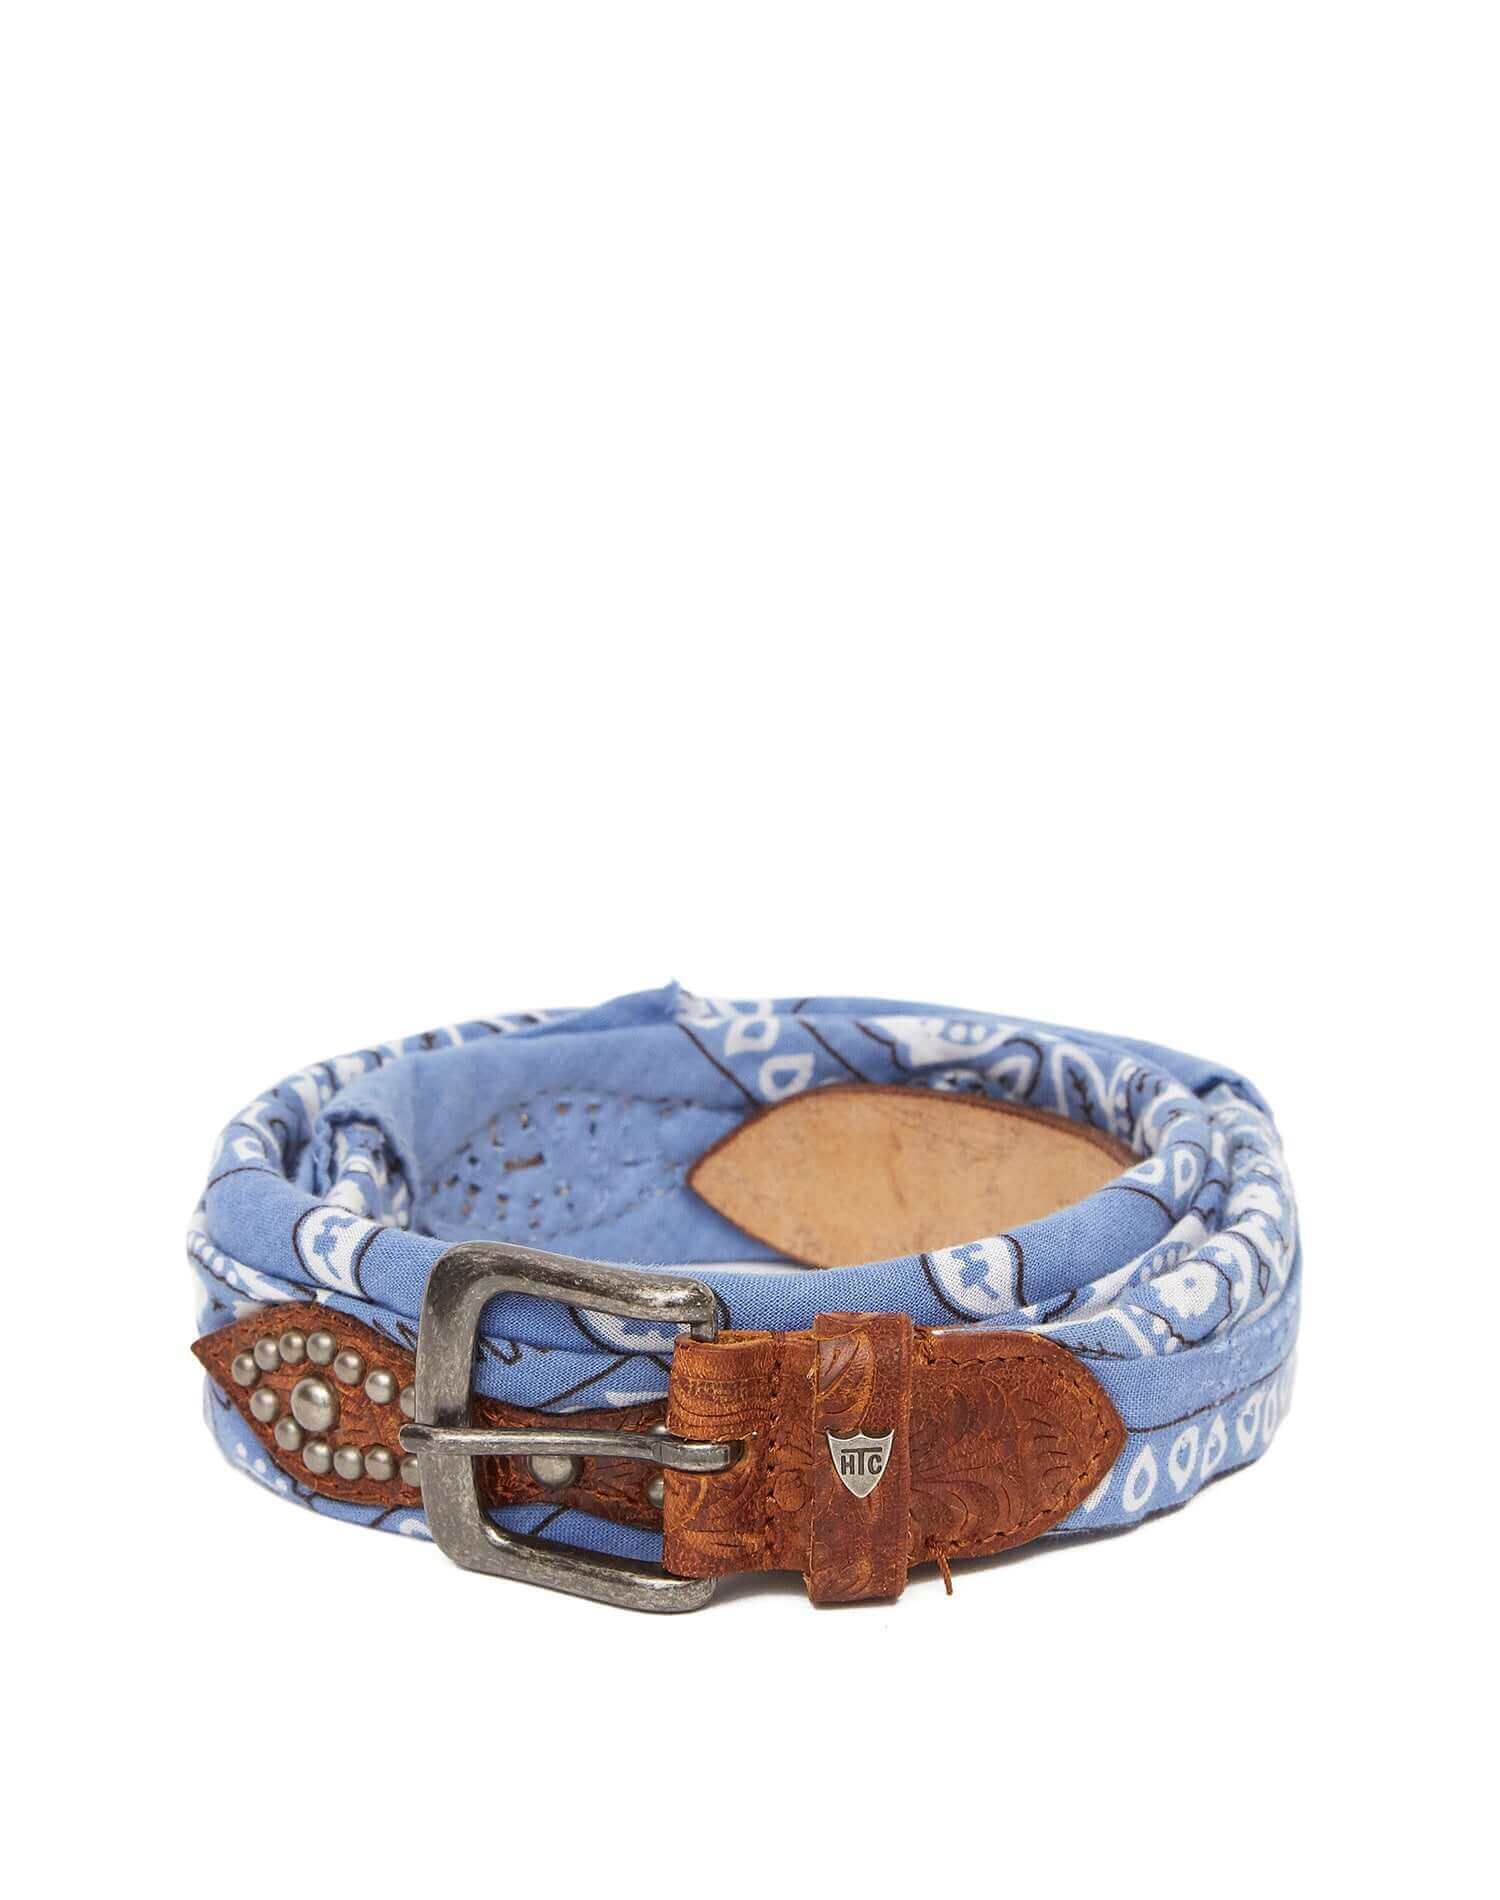 BANDANA BELT Cognac brown carved leather belt, paisley lilac bandana with studs and leather details. HTC LOS ANGELES